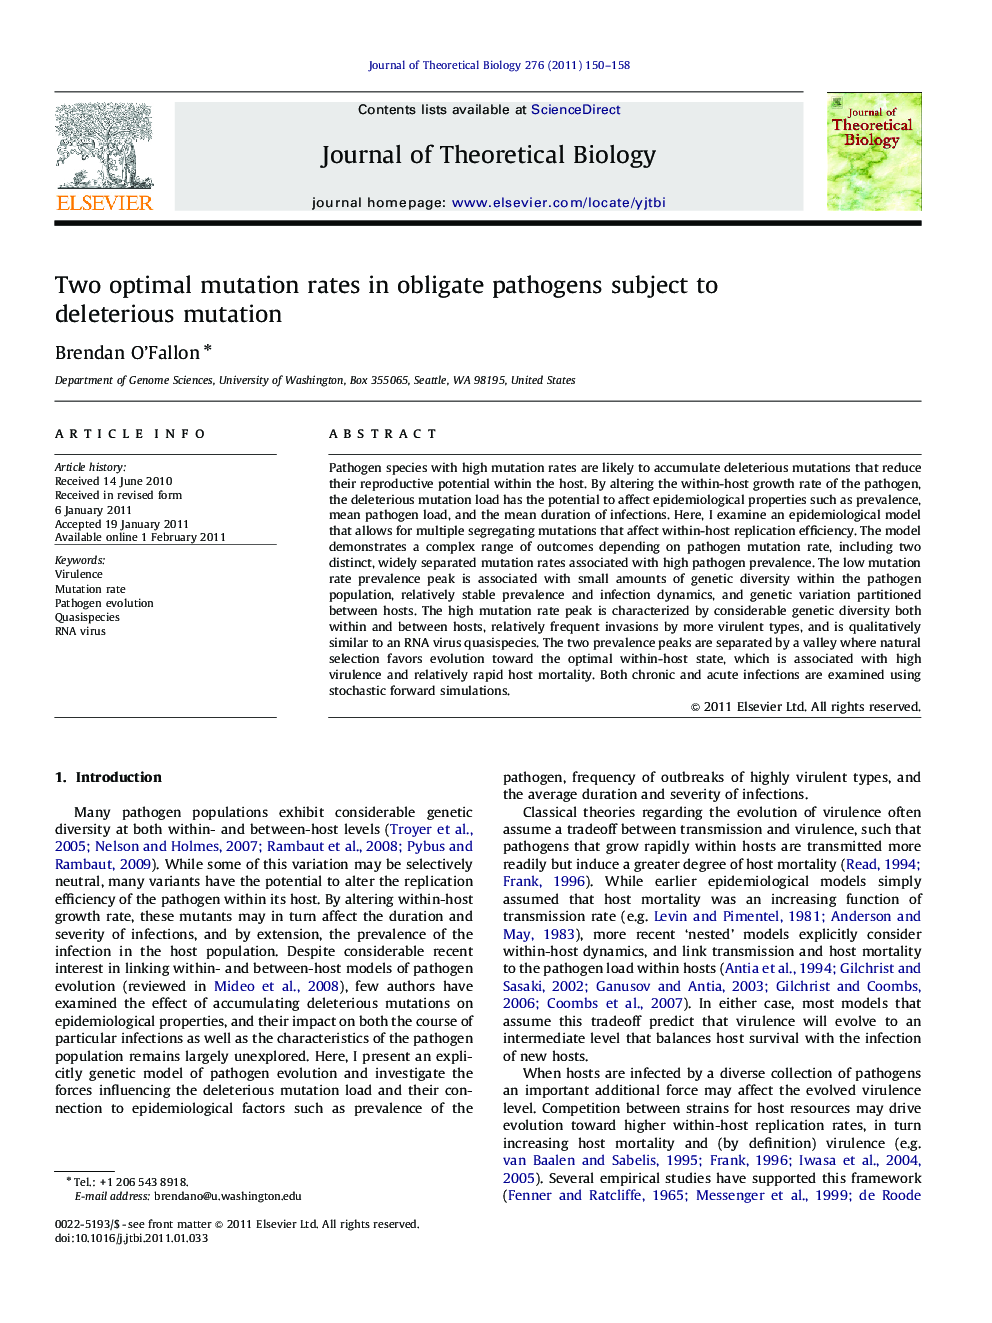 Two optimal mutation rates in obligate pathogens subject to deleterious mutation